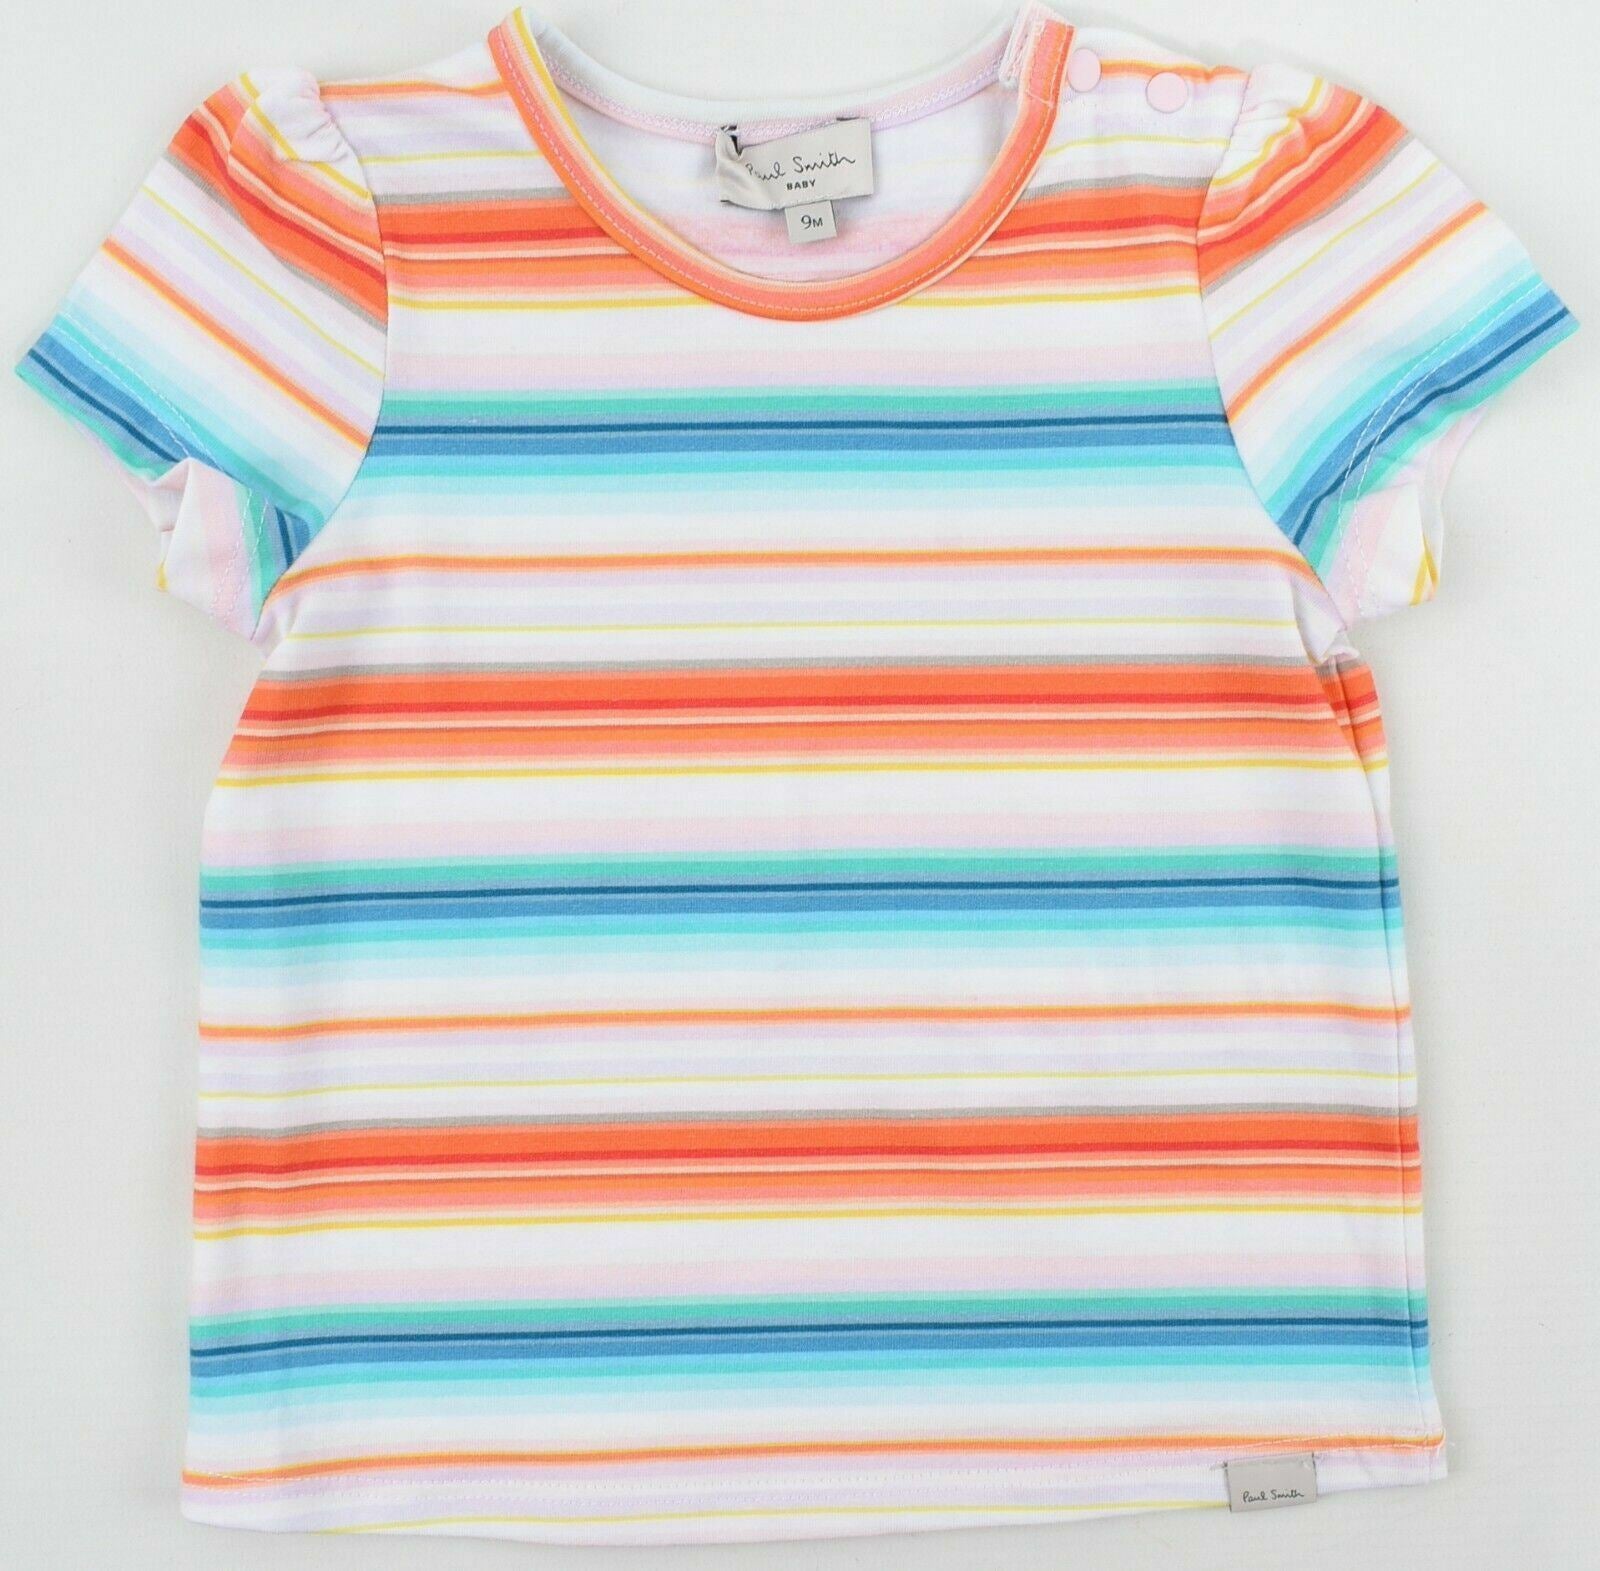 PAUL SMITH Baby Girls' Striped T-shirt Top, Multicoloured, size 9 months